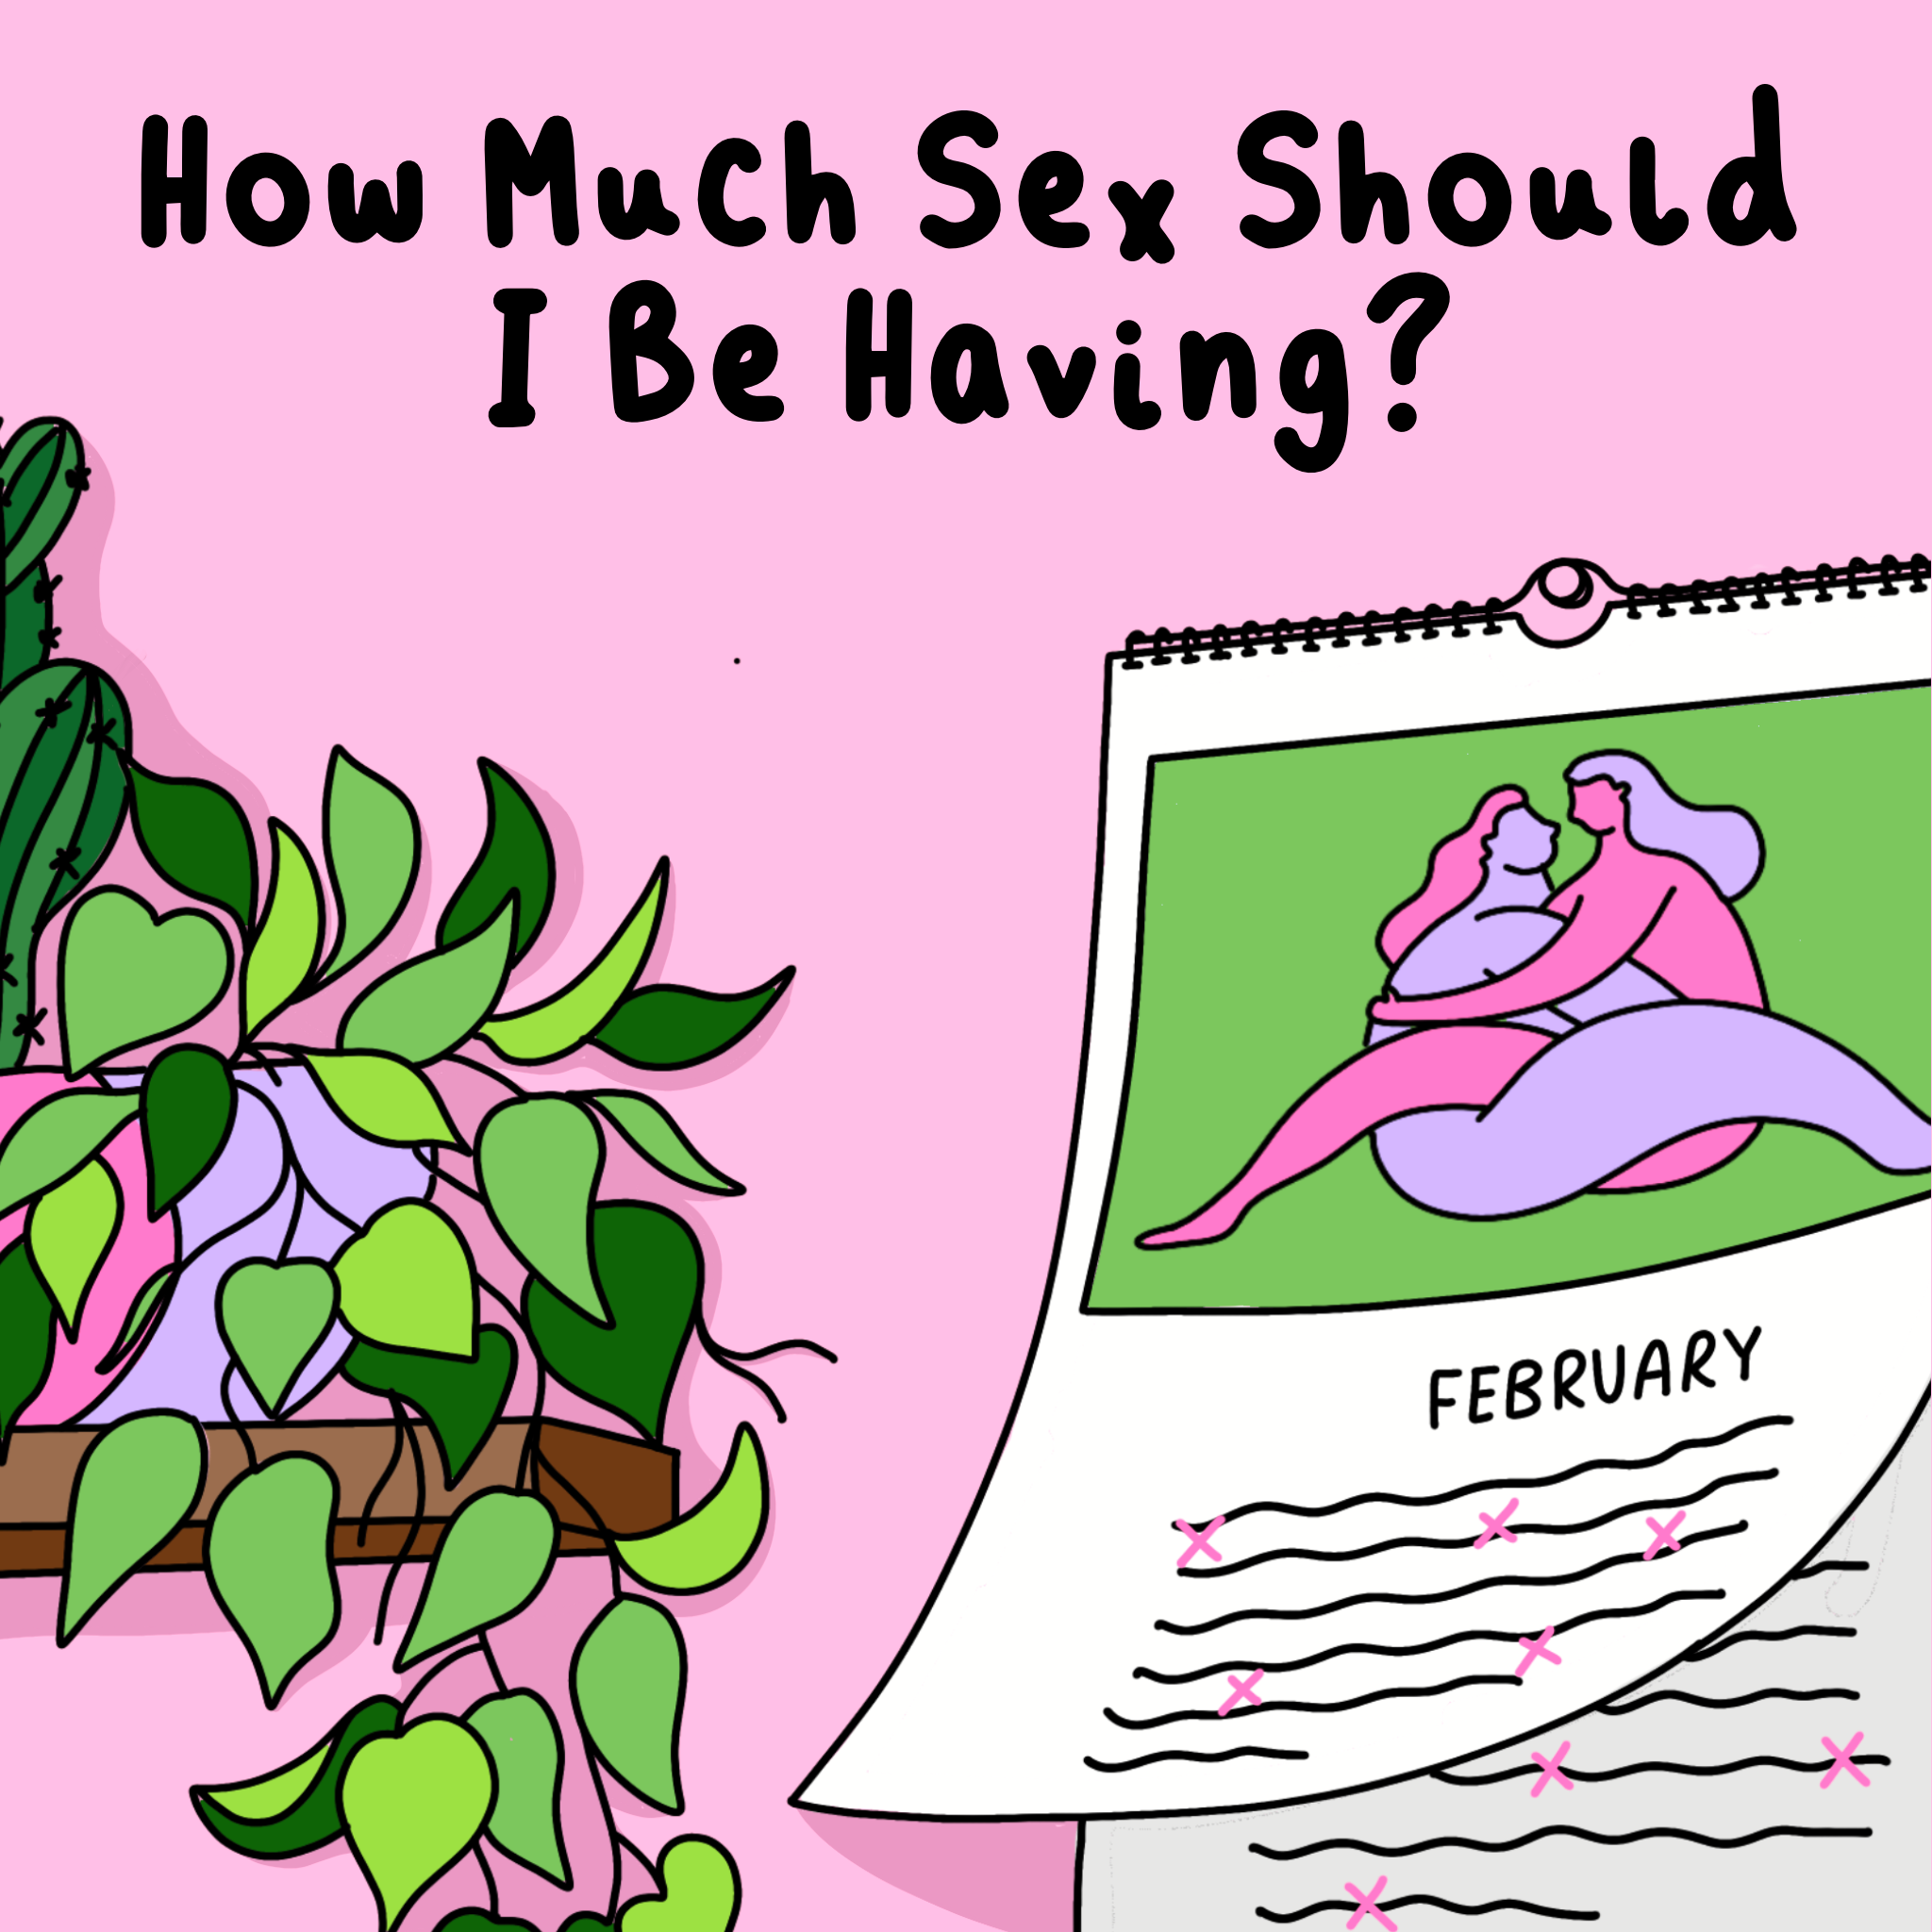 How Much Sex Should I Be Having?